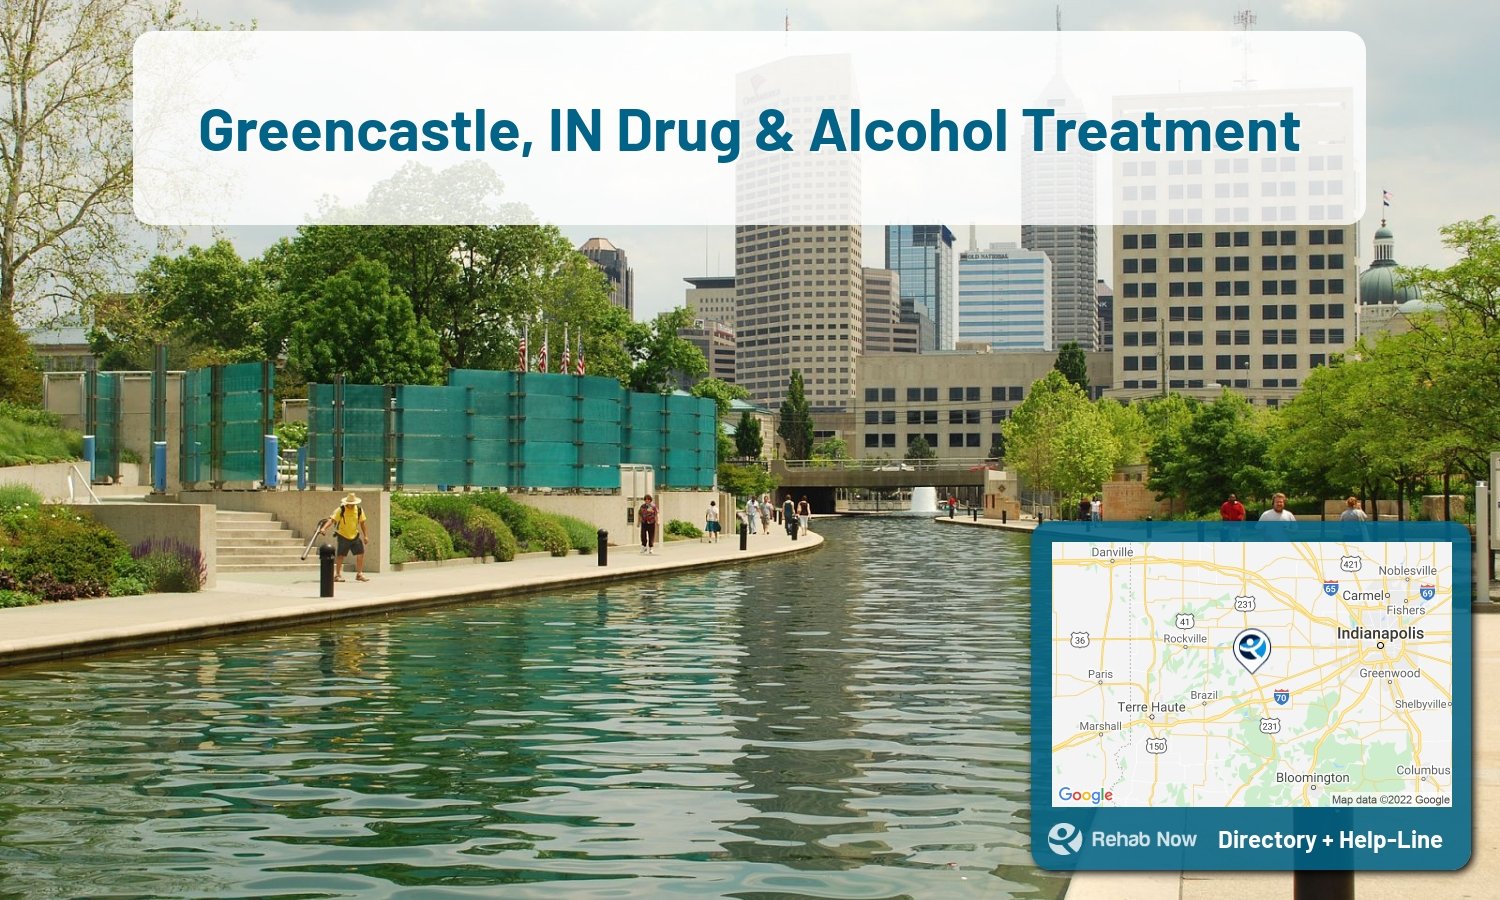 Drug rehab and alcohol treatment services nearby Greencastle, IN. Need help choosing a treatment program? Call our free hotline!